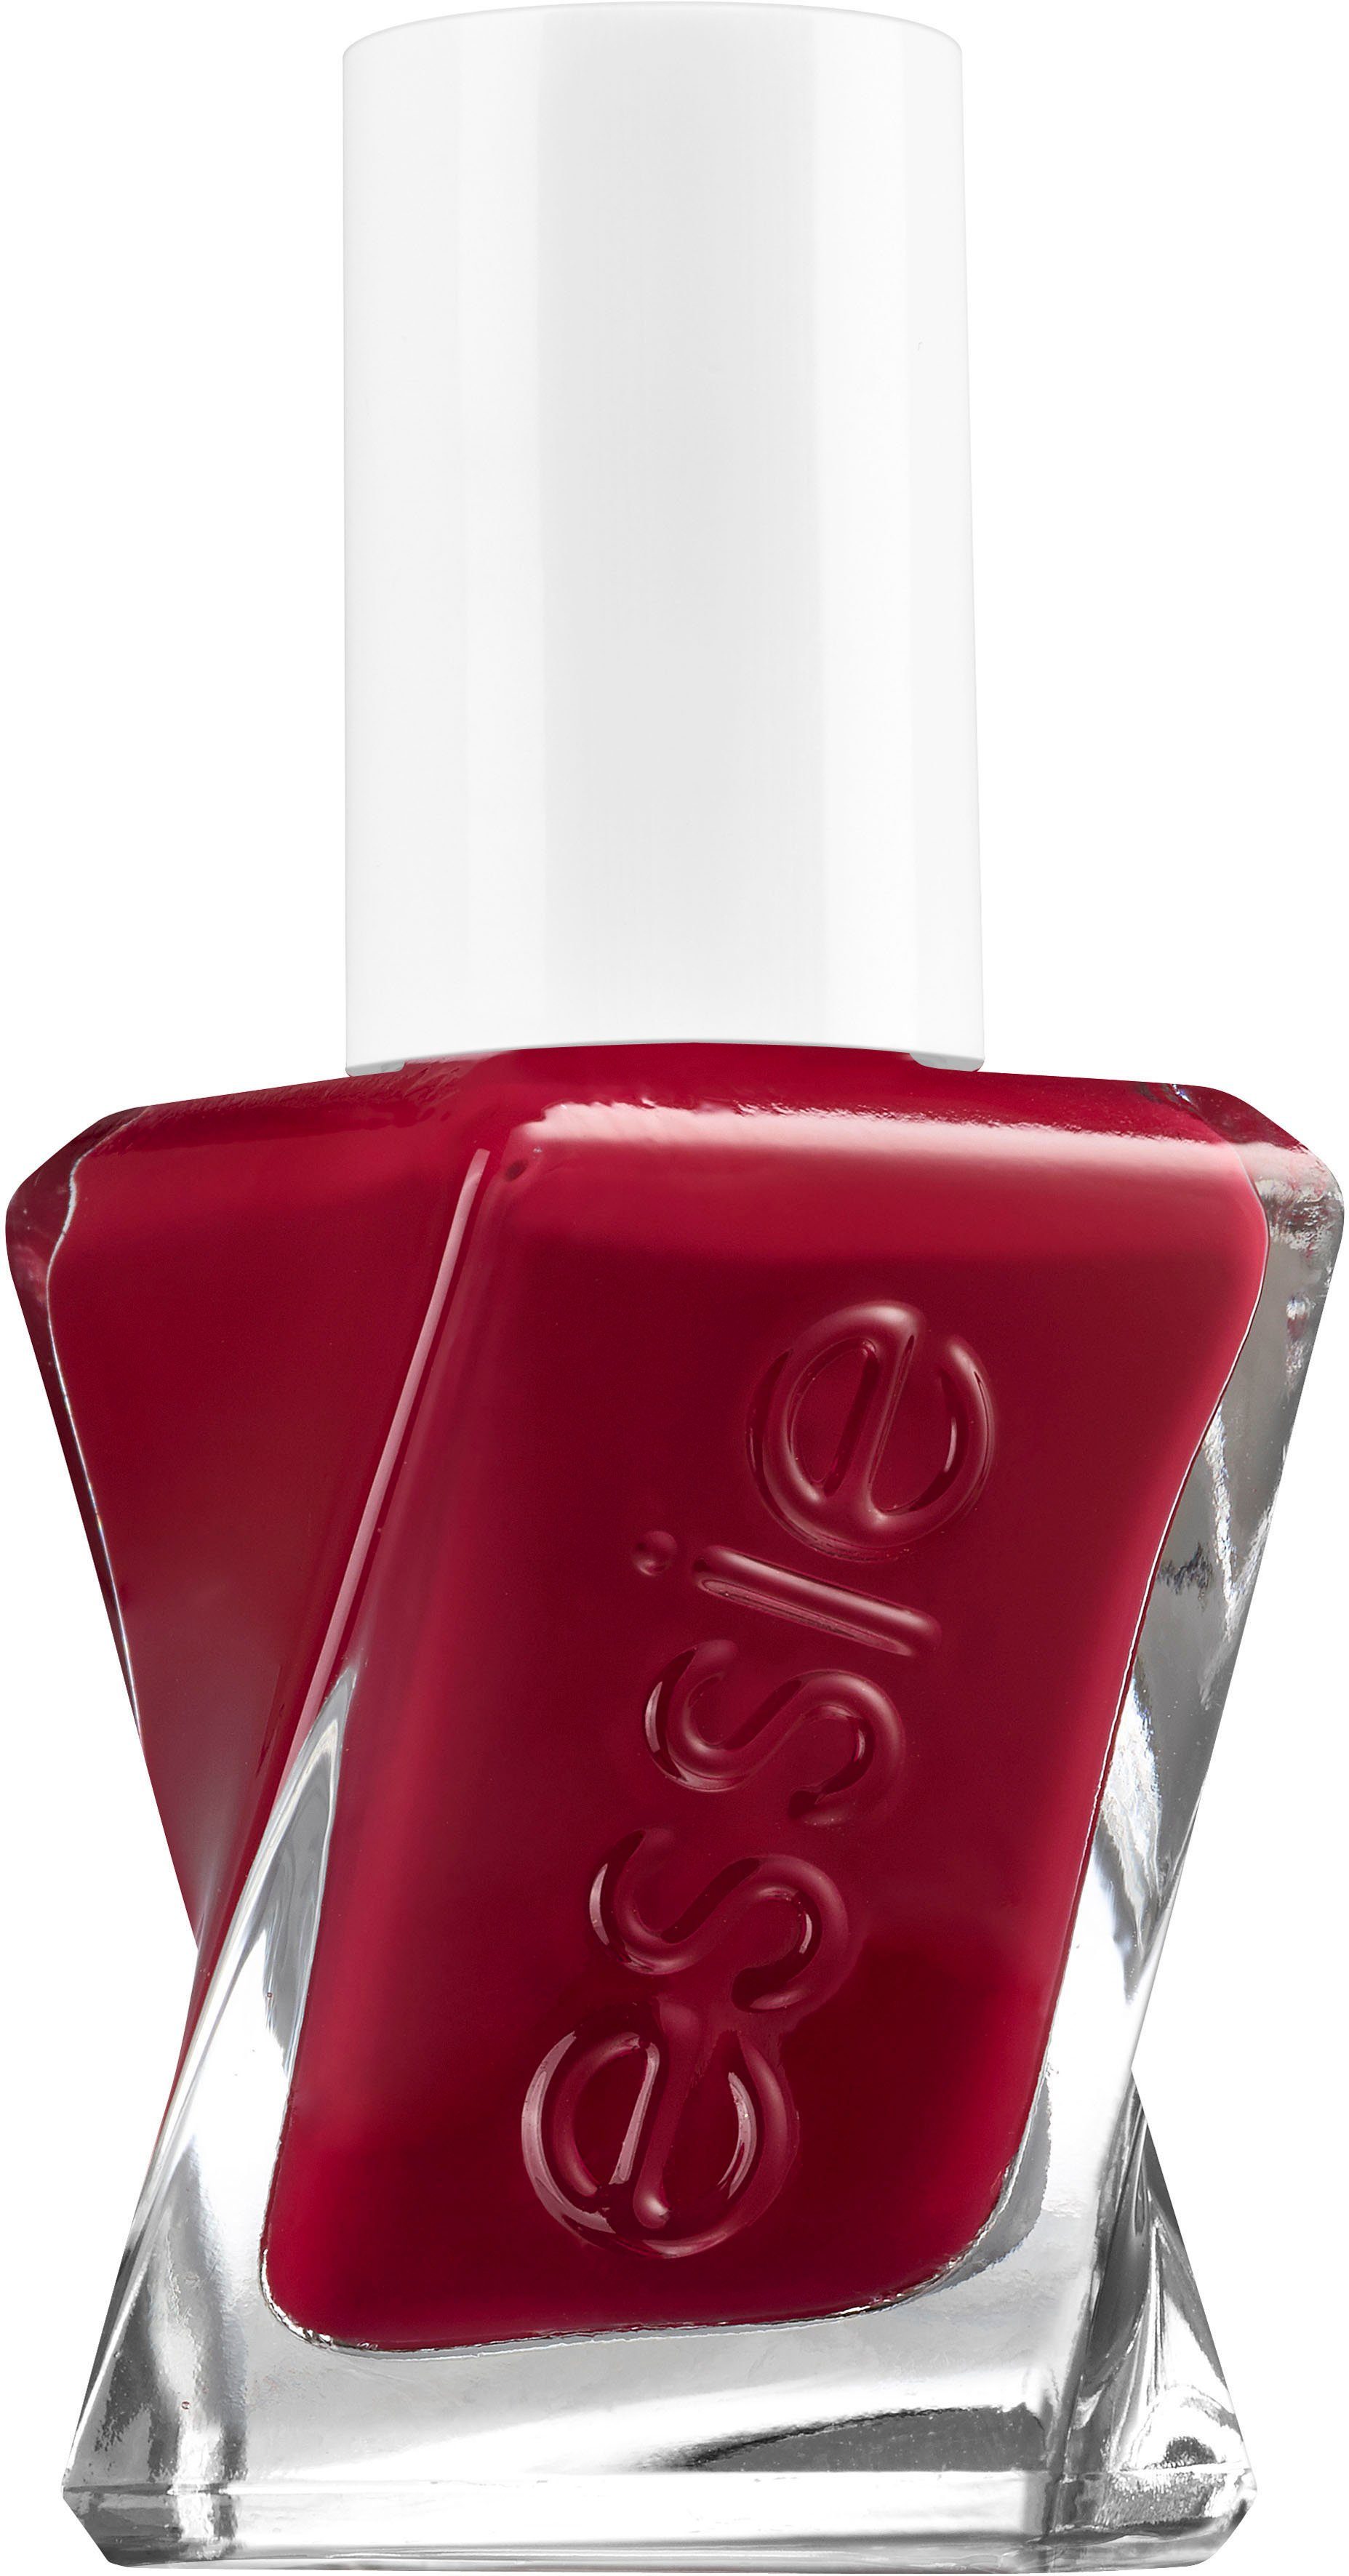 essie Gel-Nagellack Gel Couture Rot Nr. 509 Paint the gown red | Nagellacke